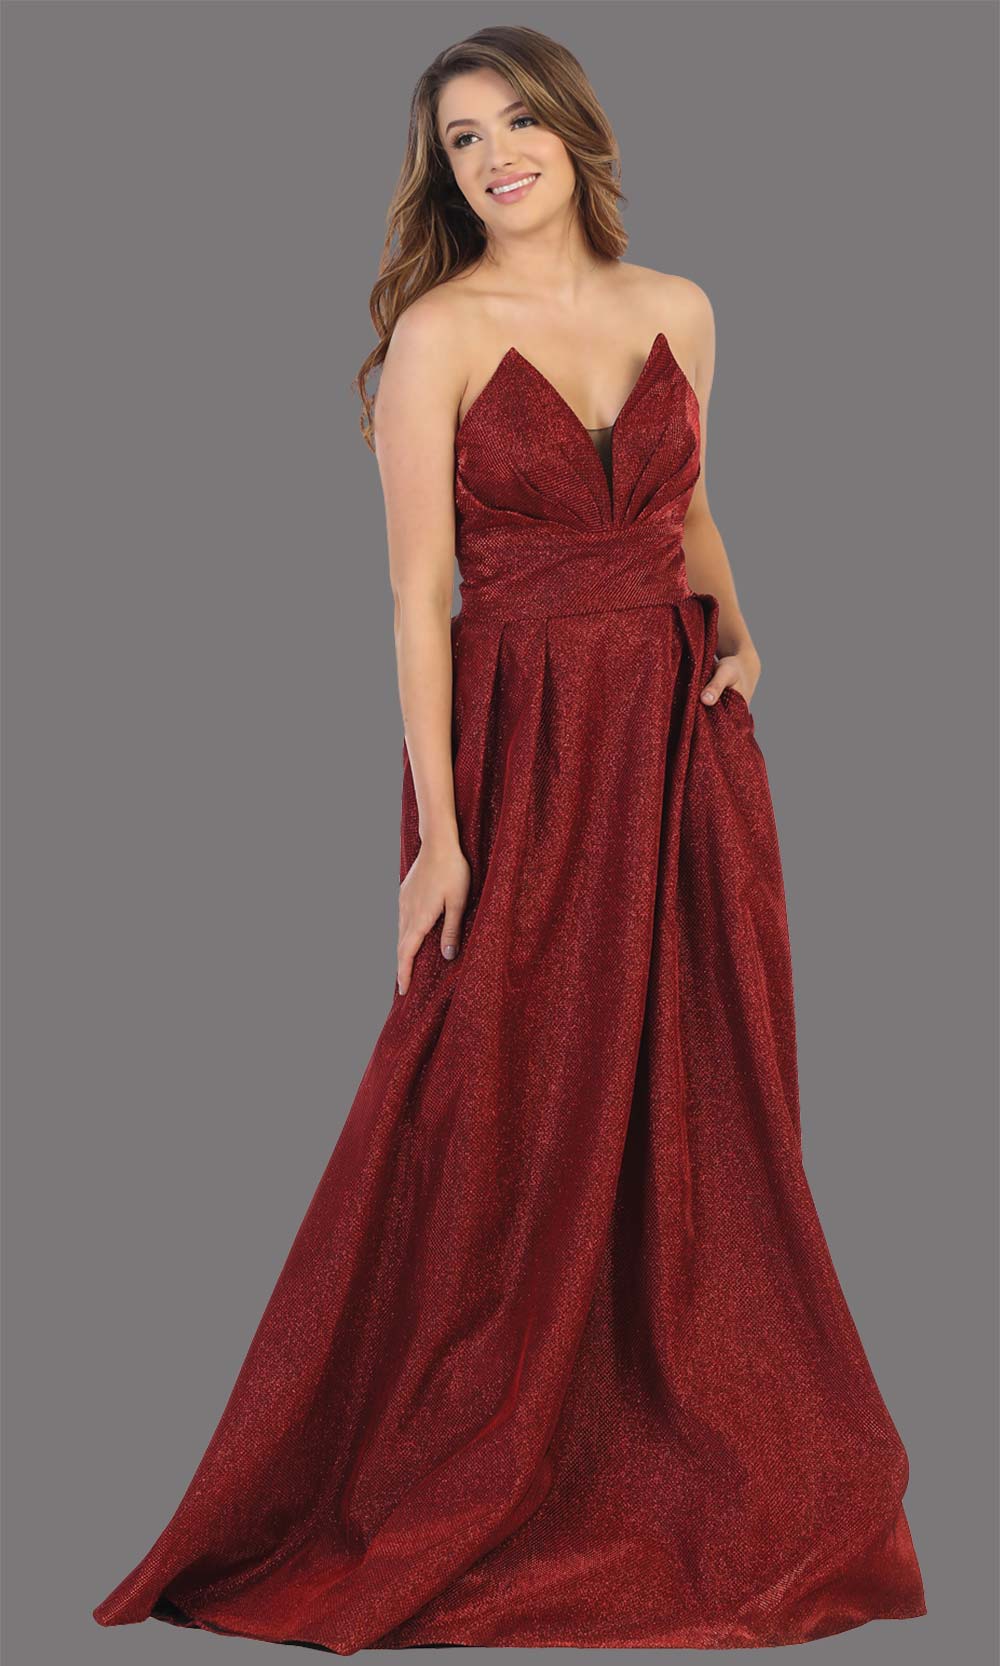 Mayqueen MQ1710 long burgundy metallic strapless flowy dress with pockets.This dark red a-line semi ballgown is perfect for prom, engagement dress, wedding reception dress, quinceanera, debut, sweet 16, formal wedding guest. Plus sizes are available